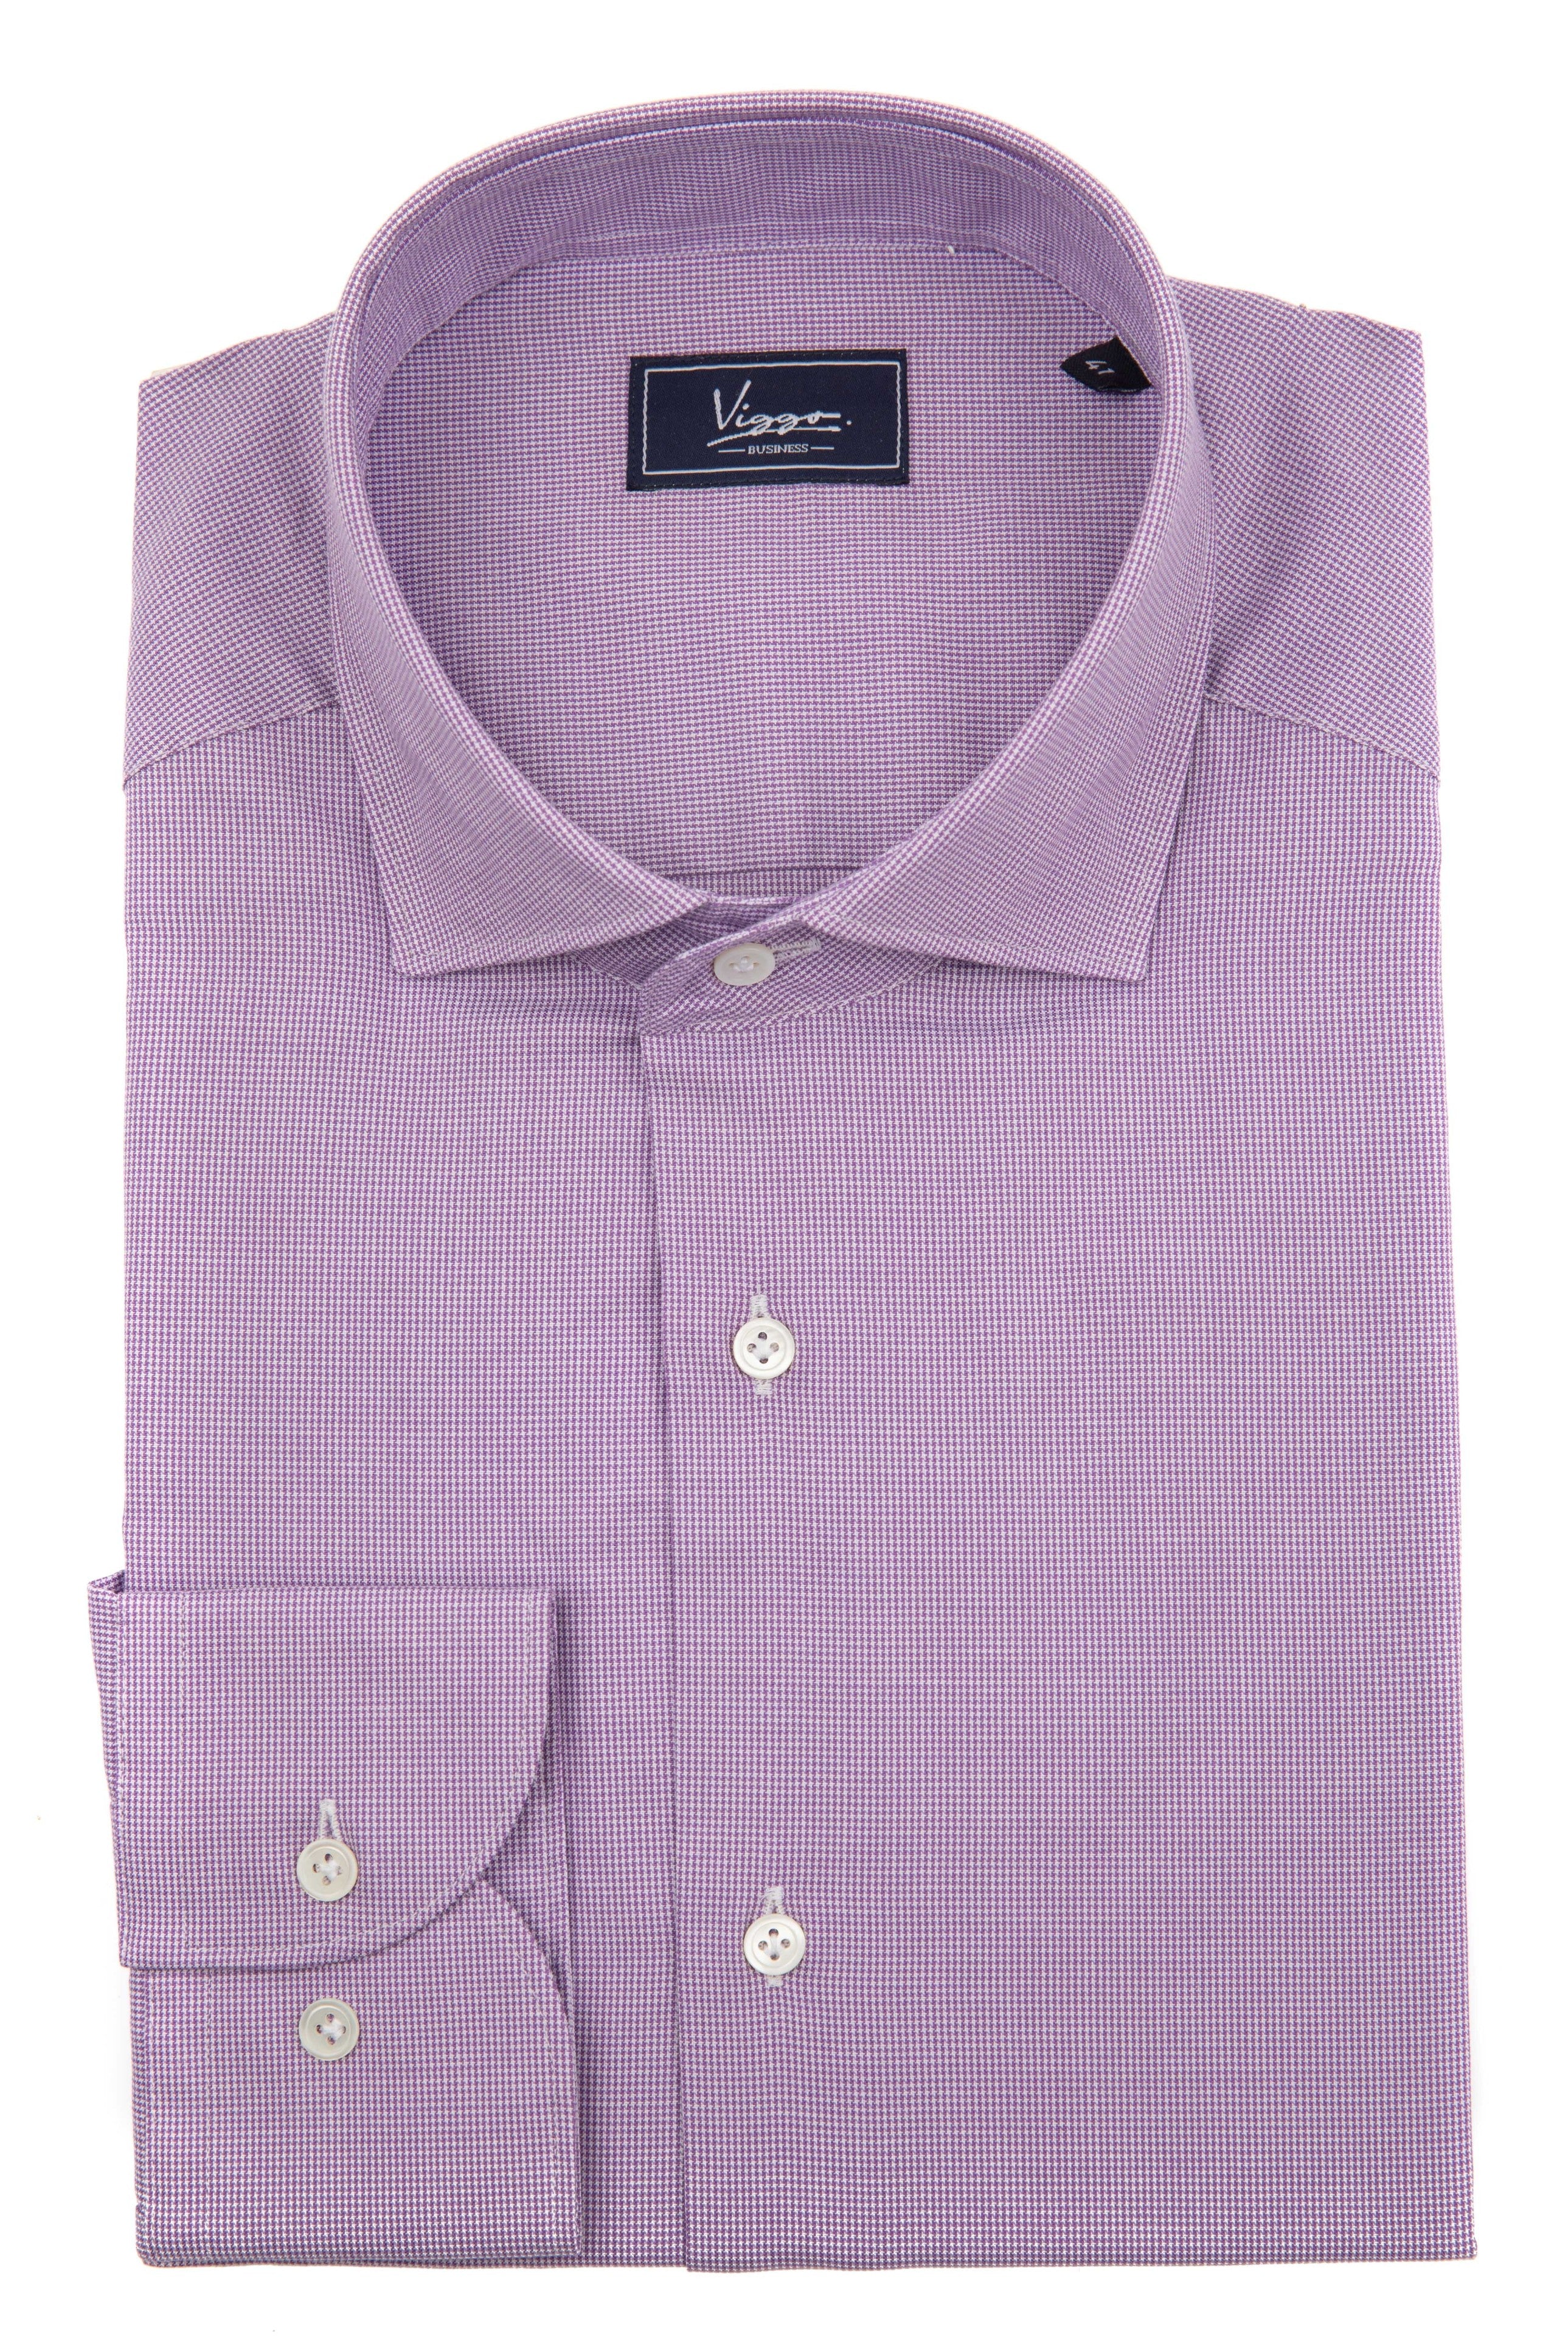 Fine Textured Purple Business Shirt With White